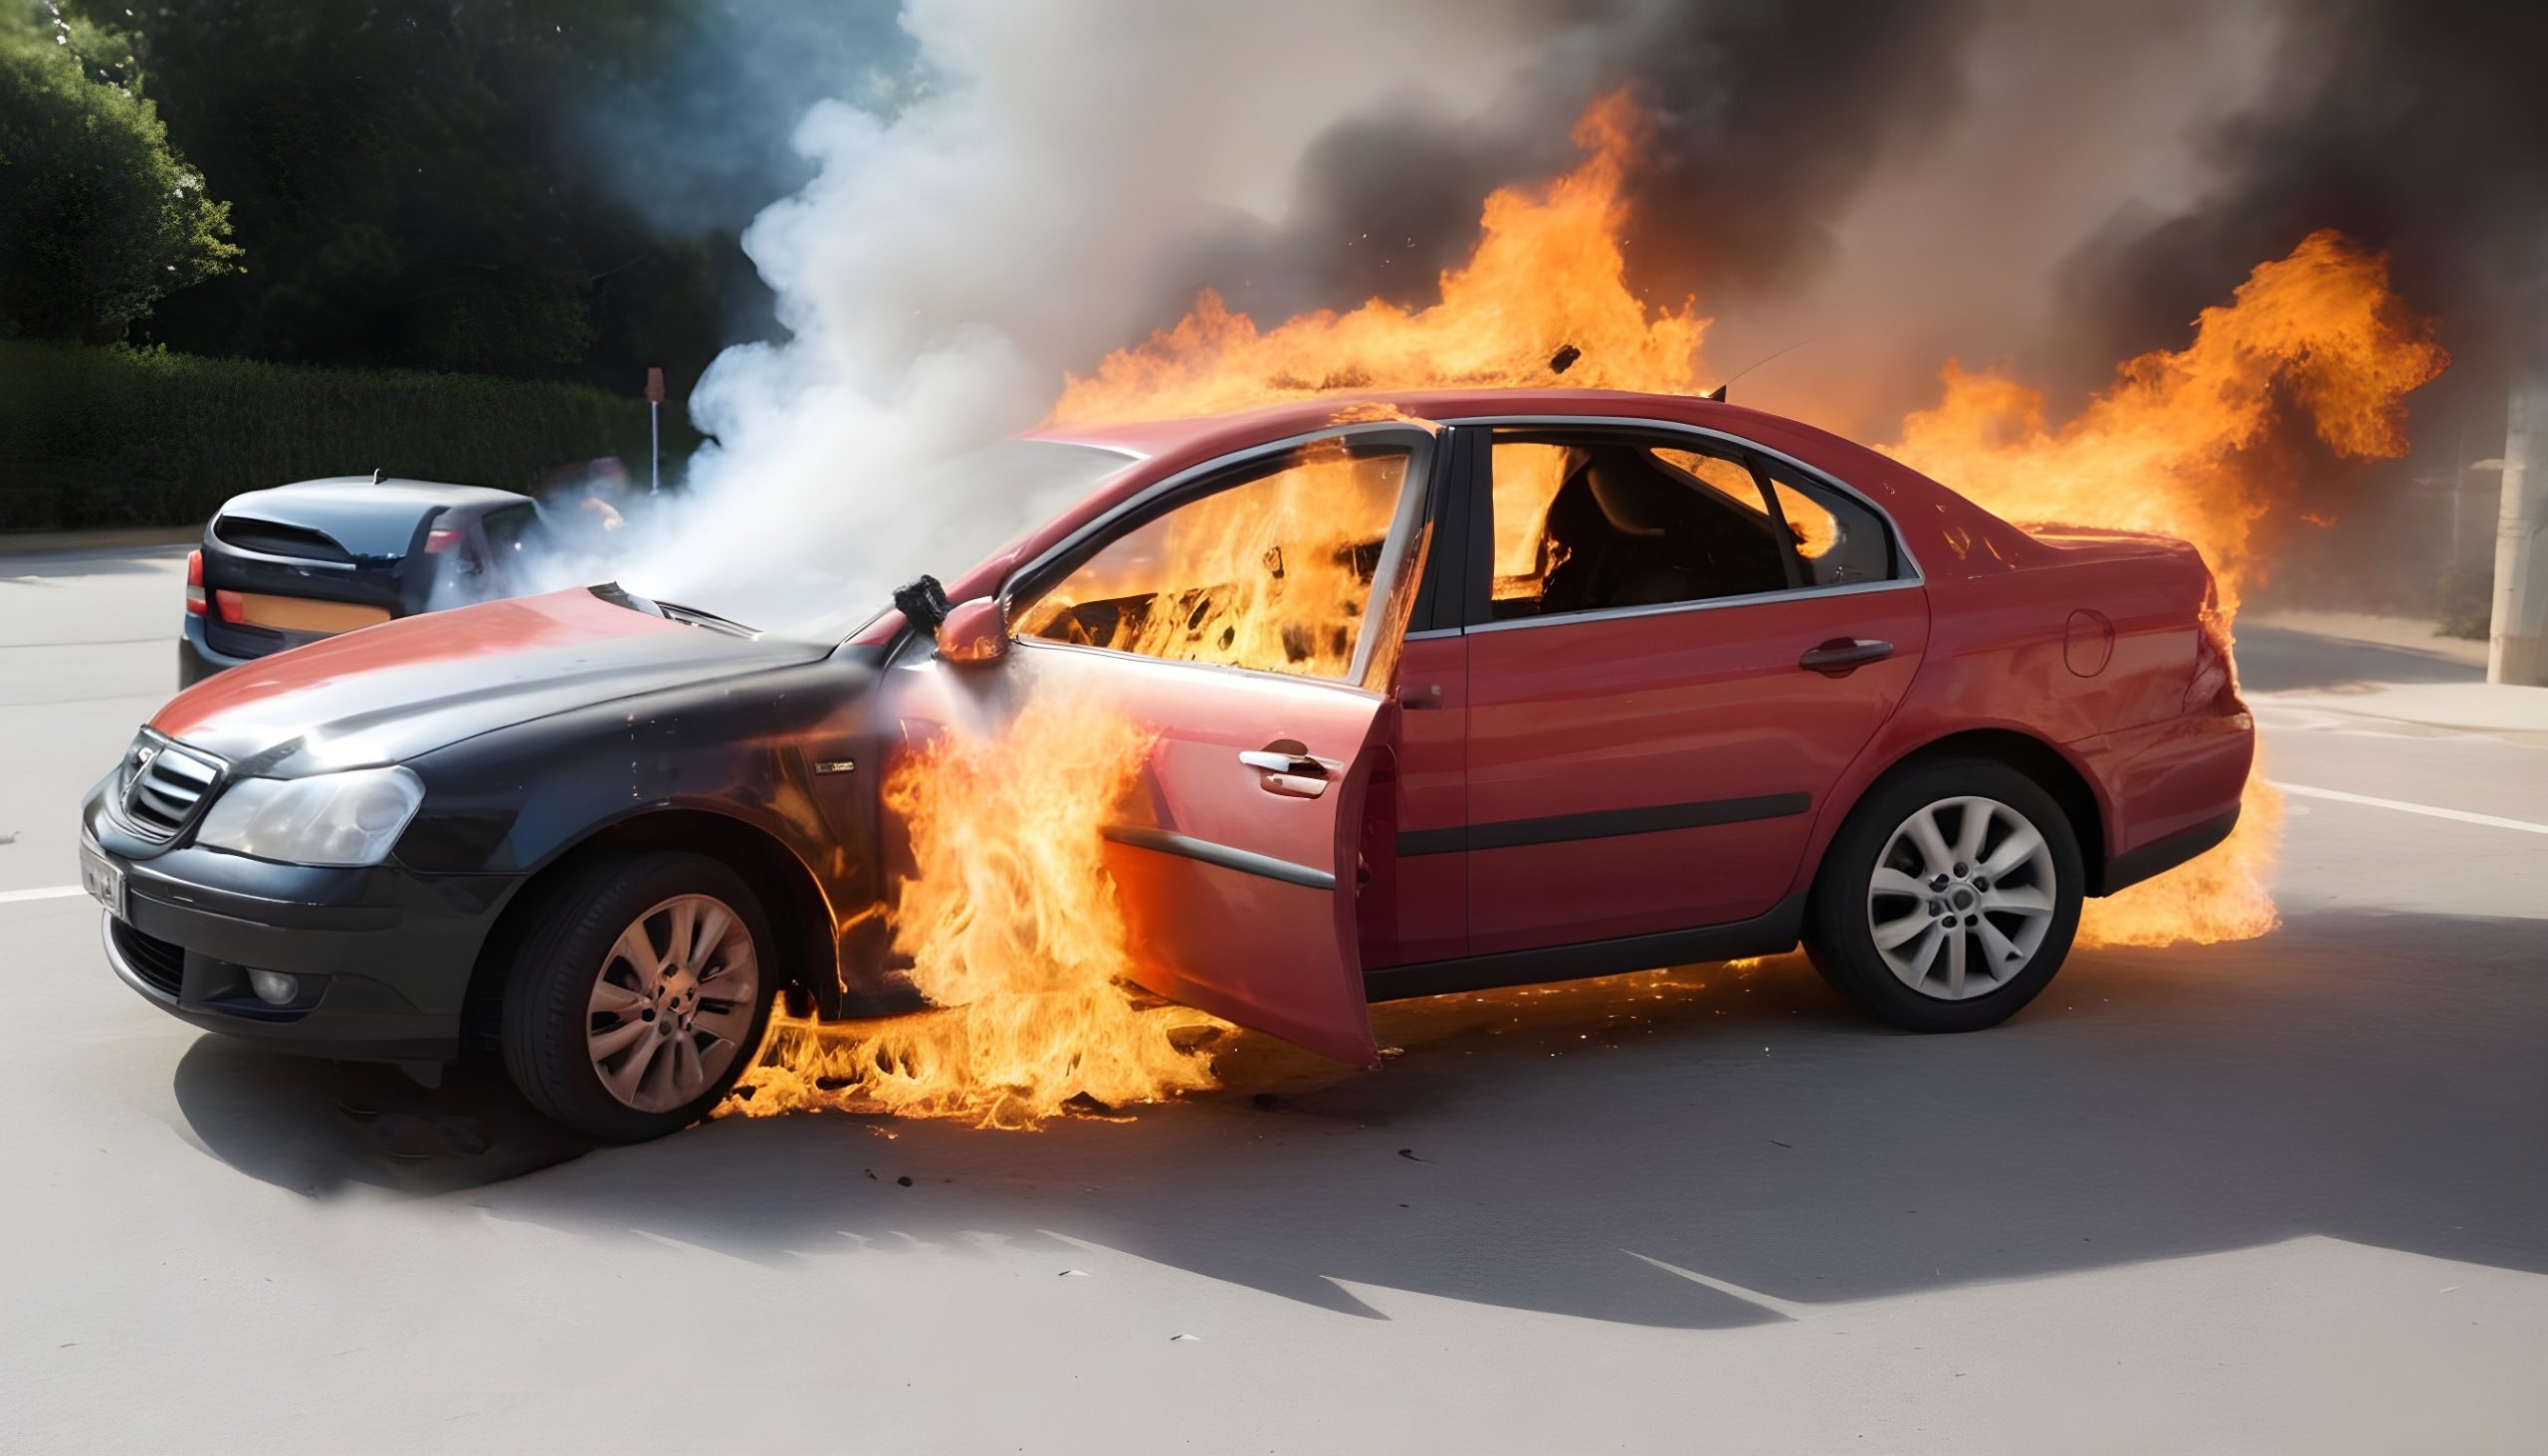 10 Ways to Keep Your Car Safe from Fire | Car Fire Safety